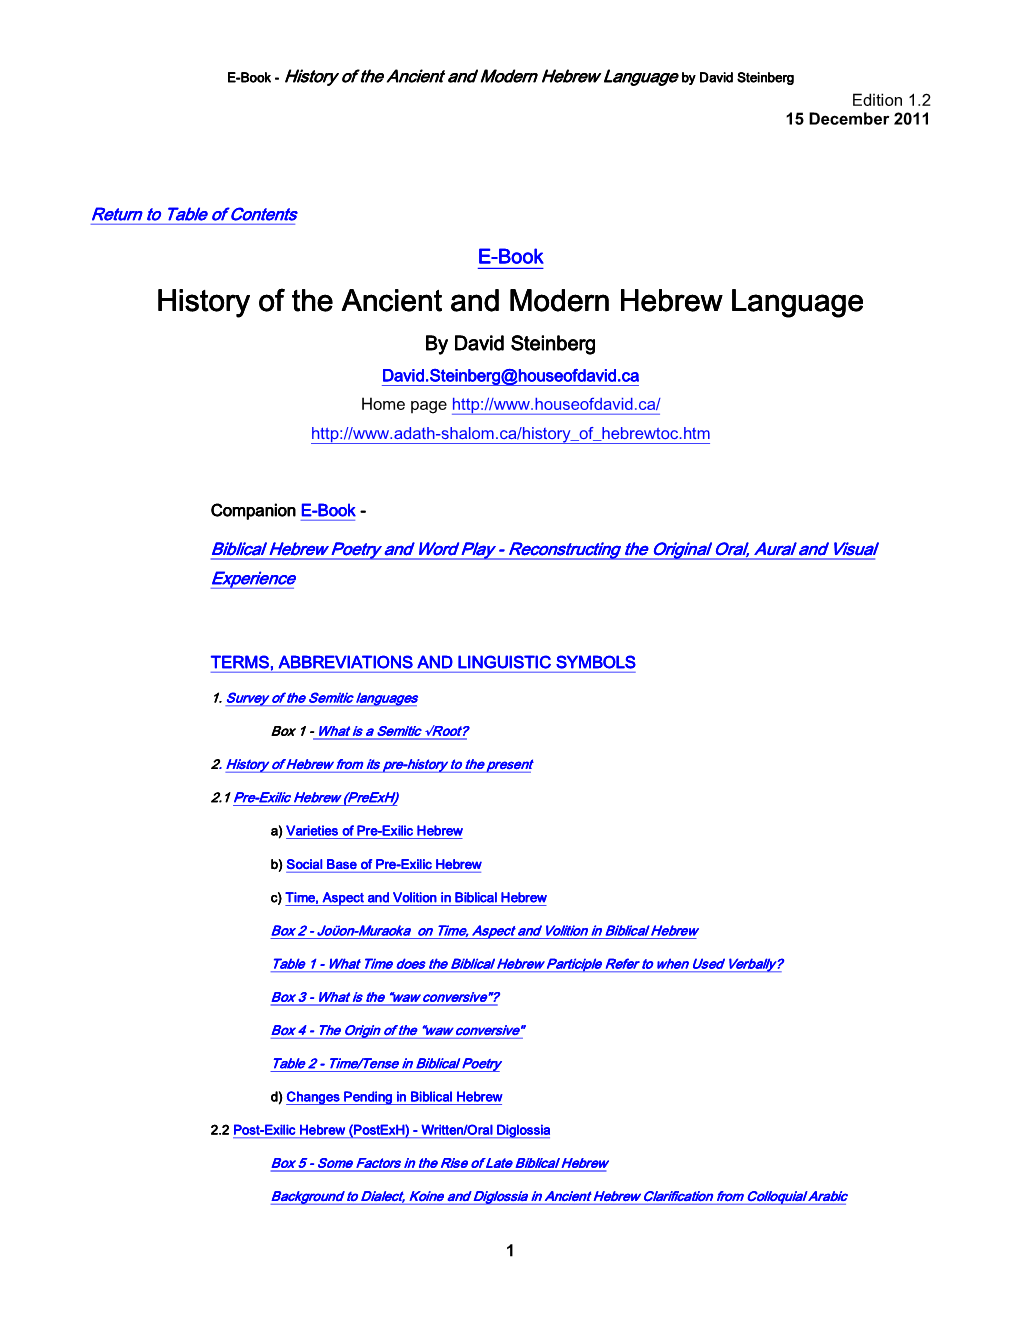 History of the Ancient and Modern Hebrew Language by David Steinberg Edition 1.2 15 December 2011